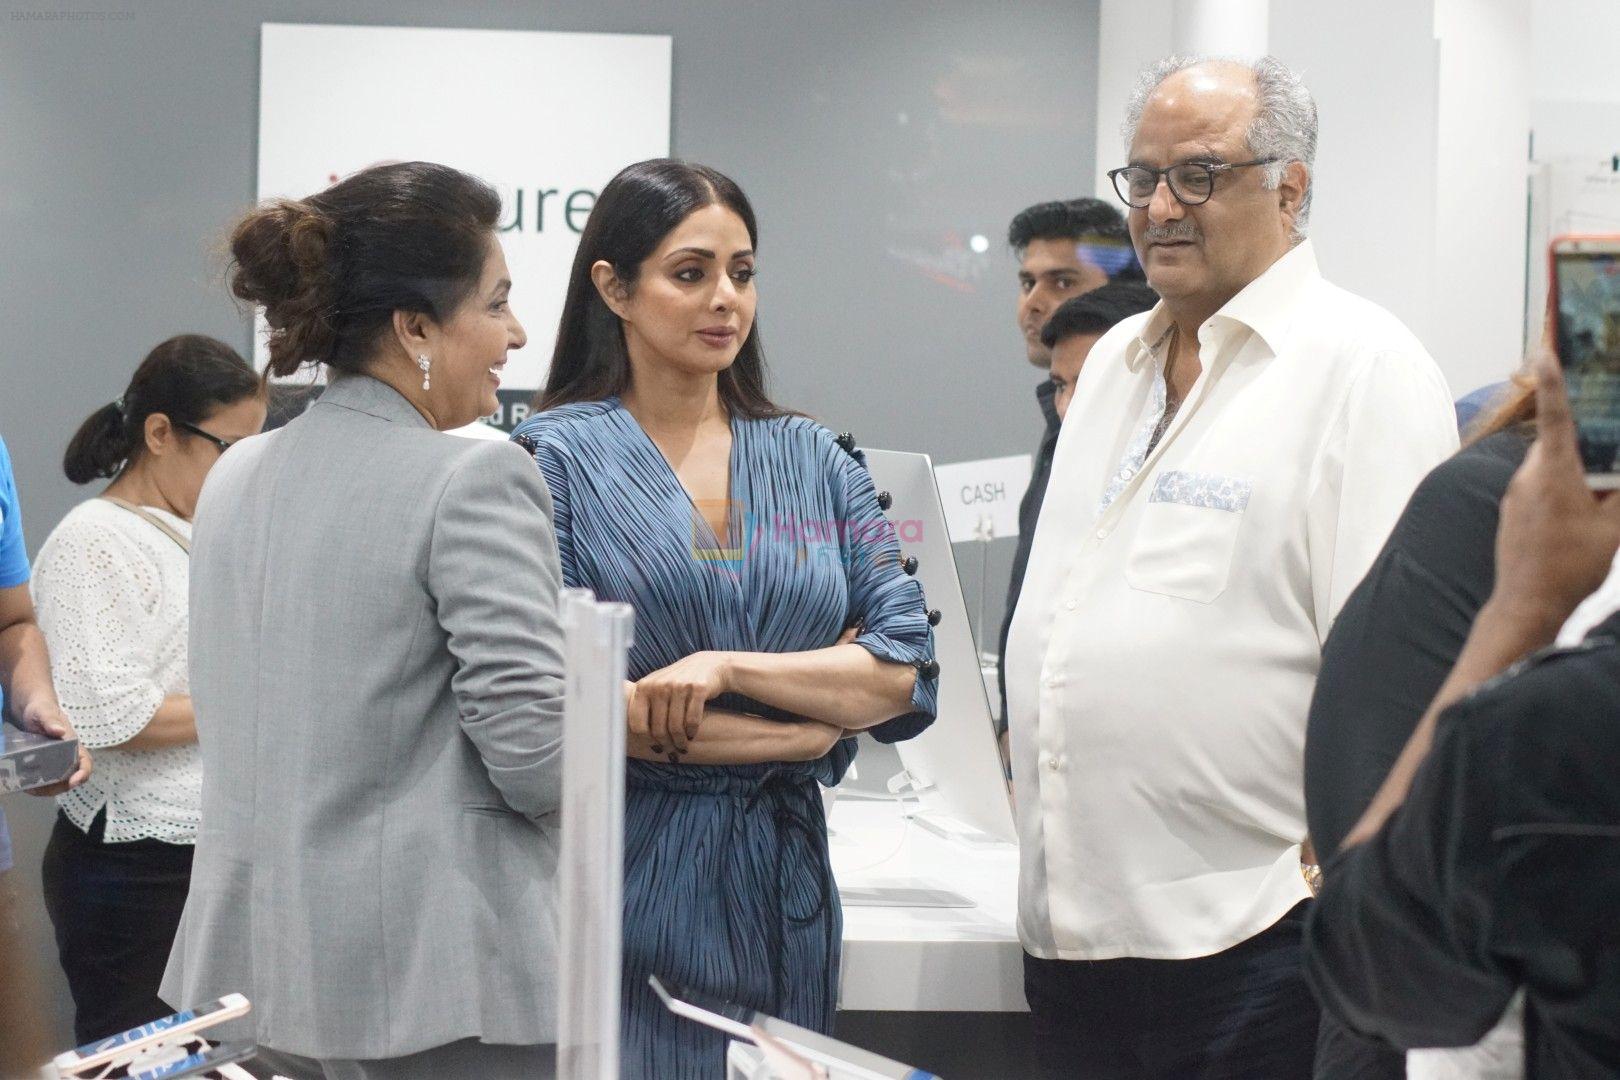 Sridevi, Boney Kapoor at the Launch Of IPhone 8 & IPhone 8+ At iAzure on 29th Sept 2017